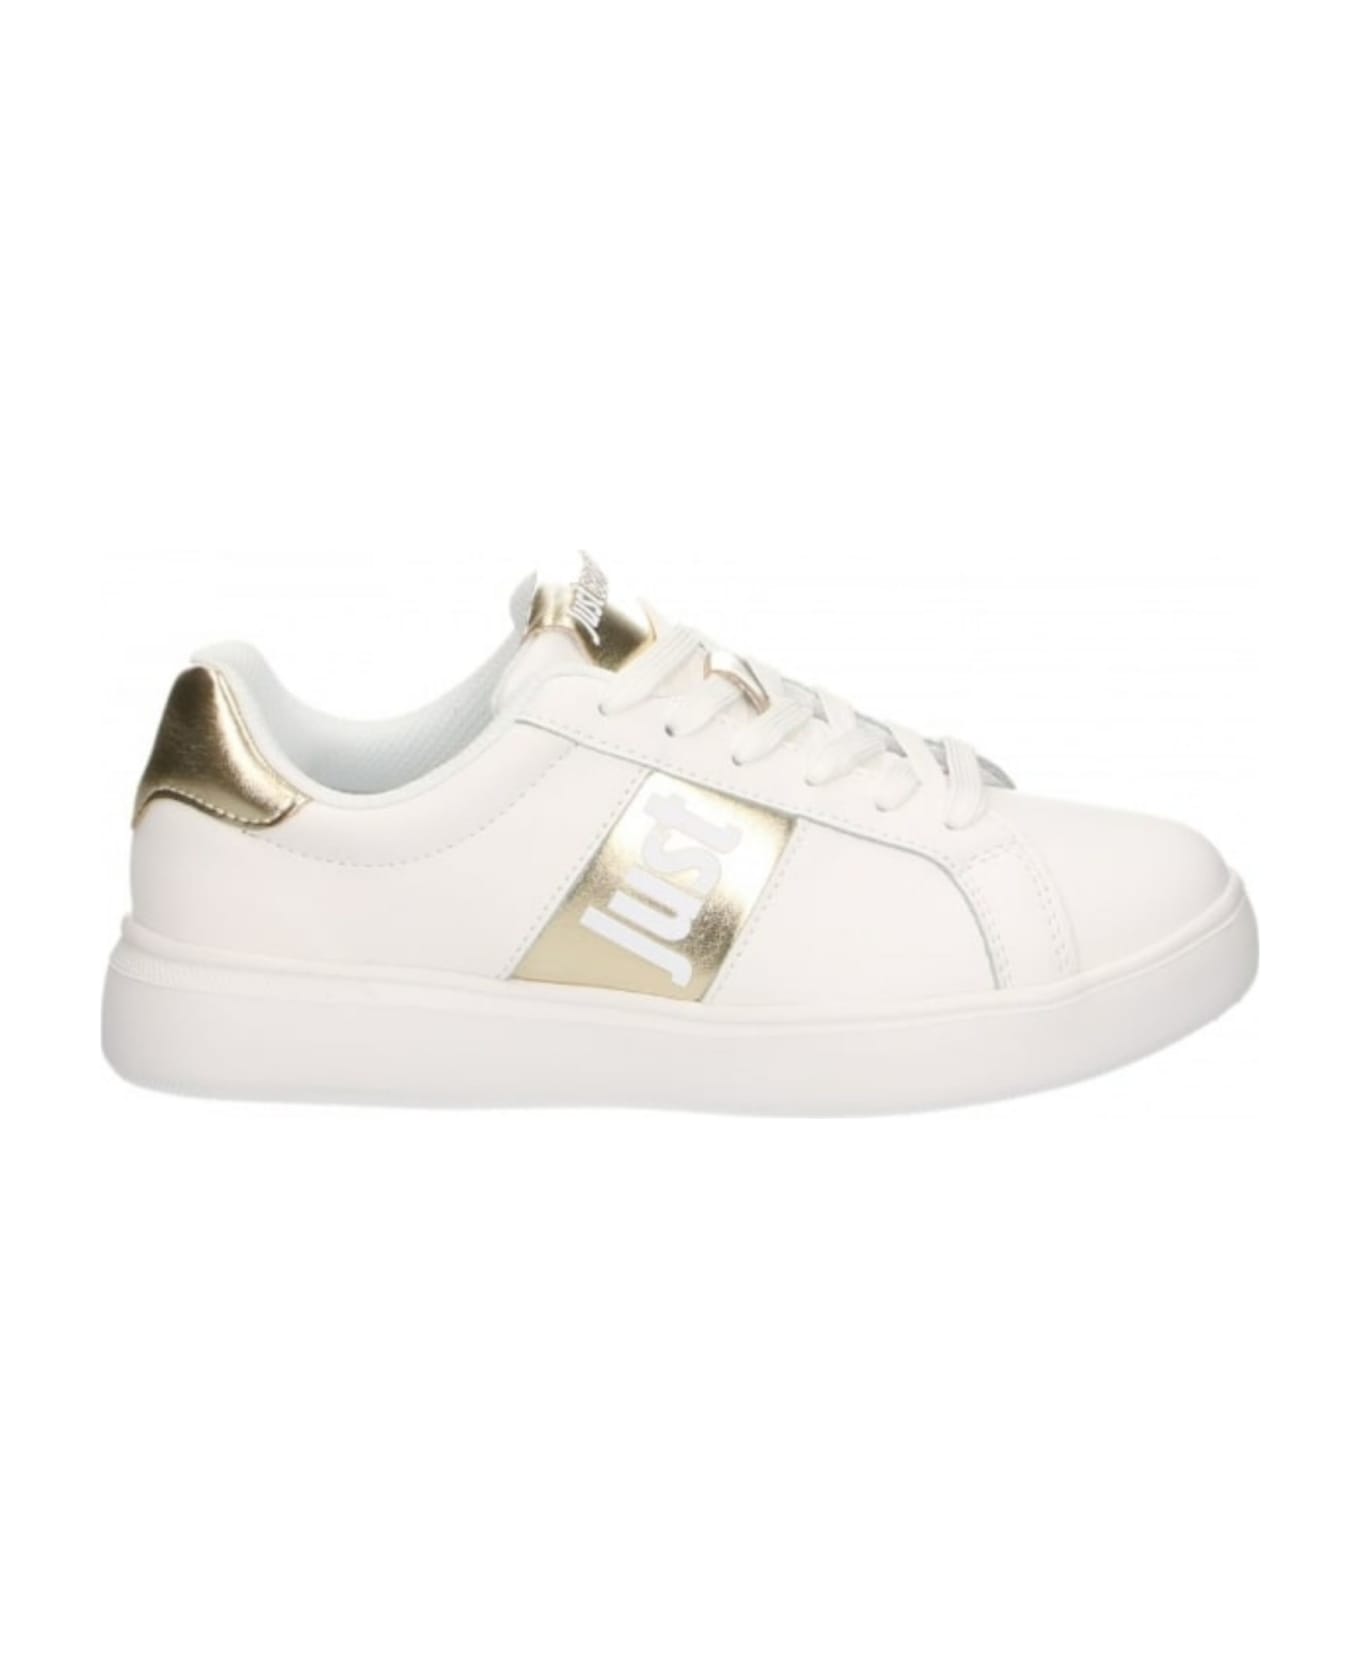 Just Cavalli Shoes - White